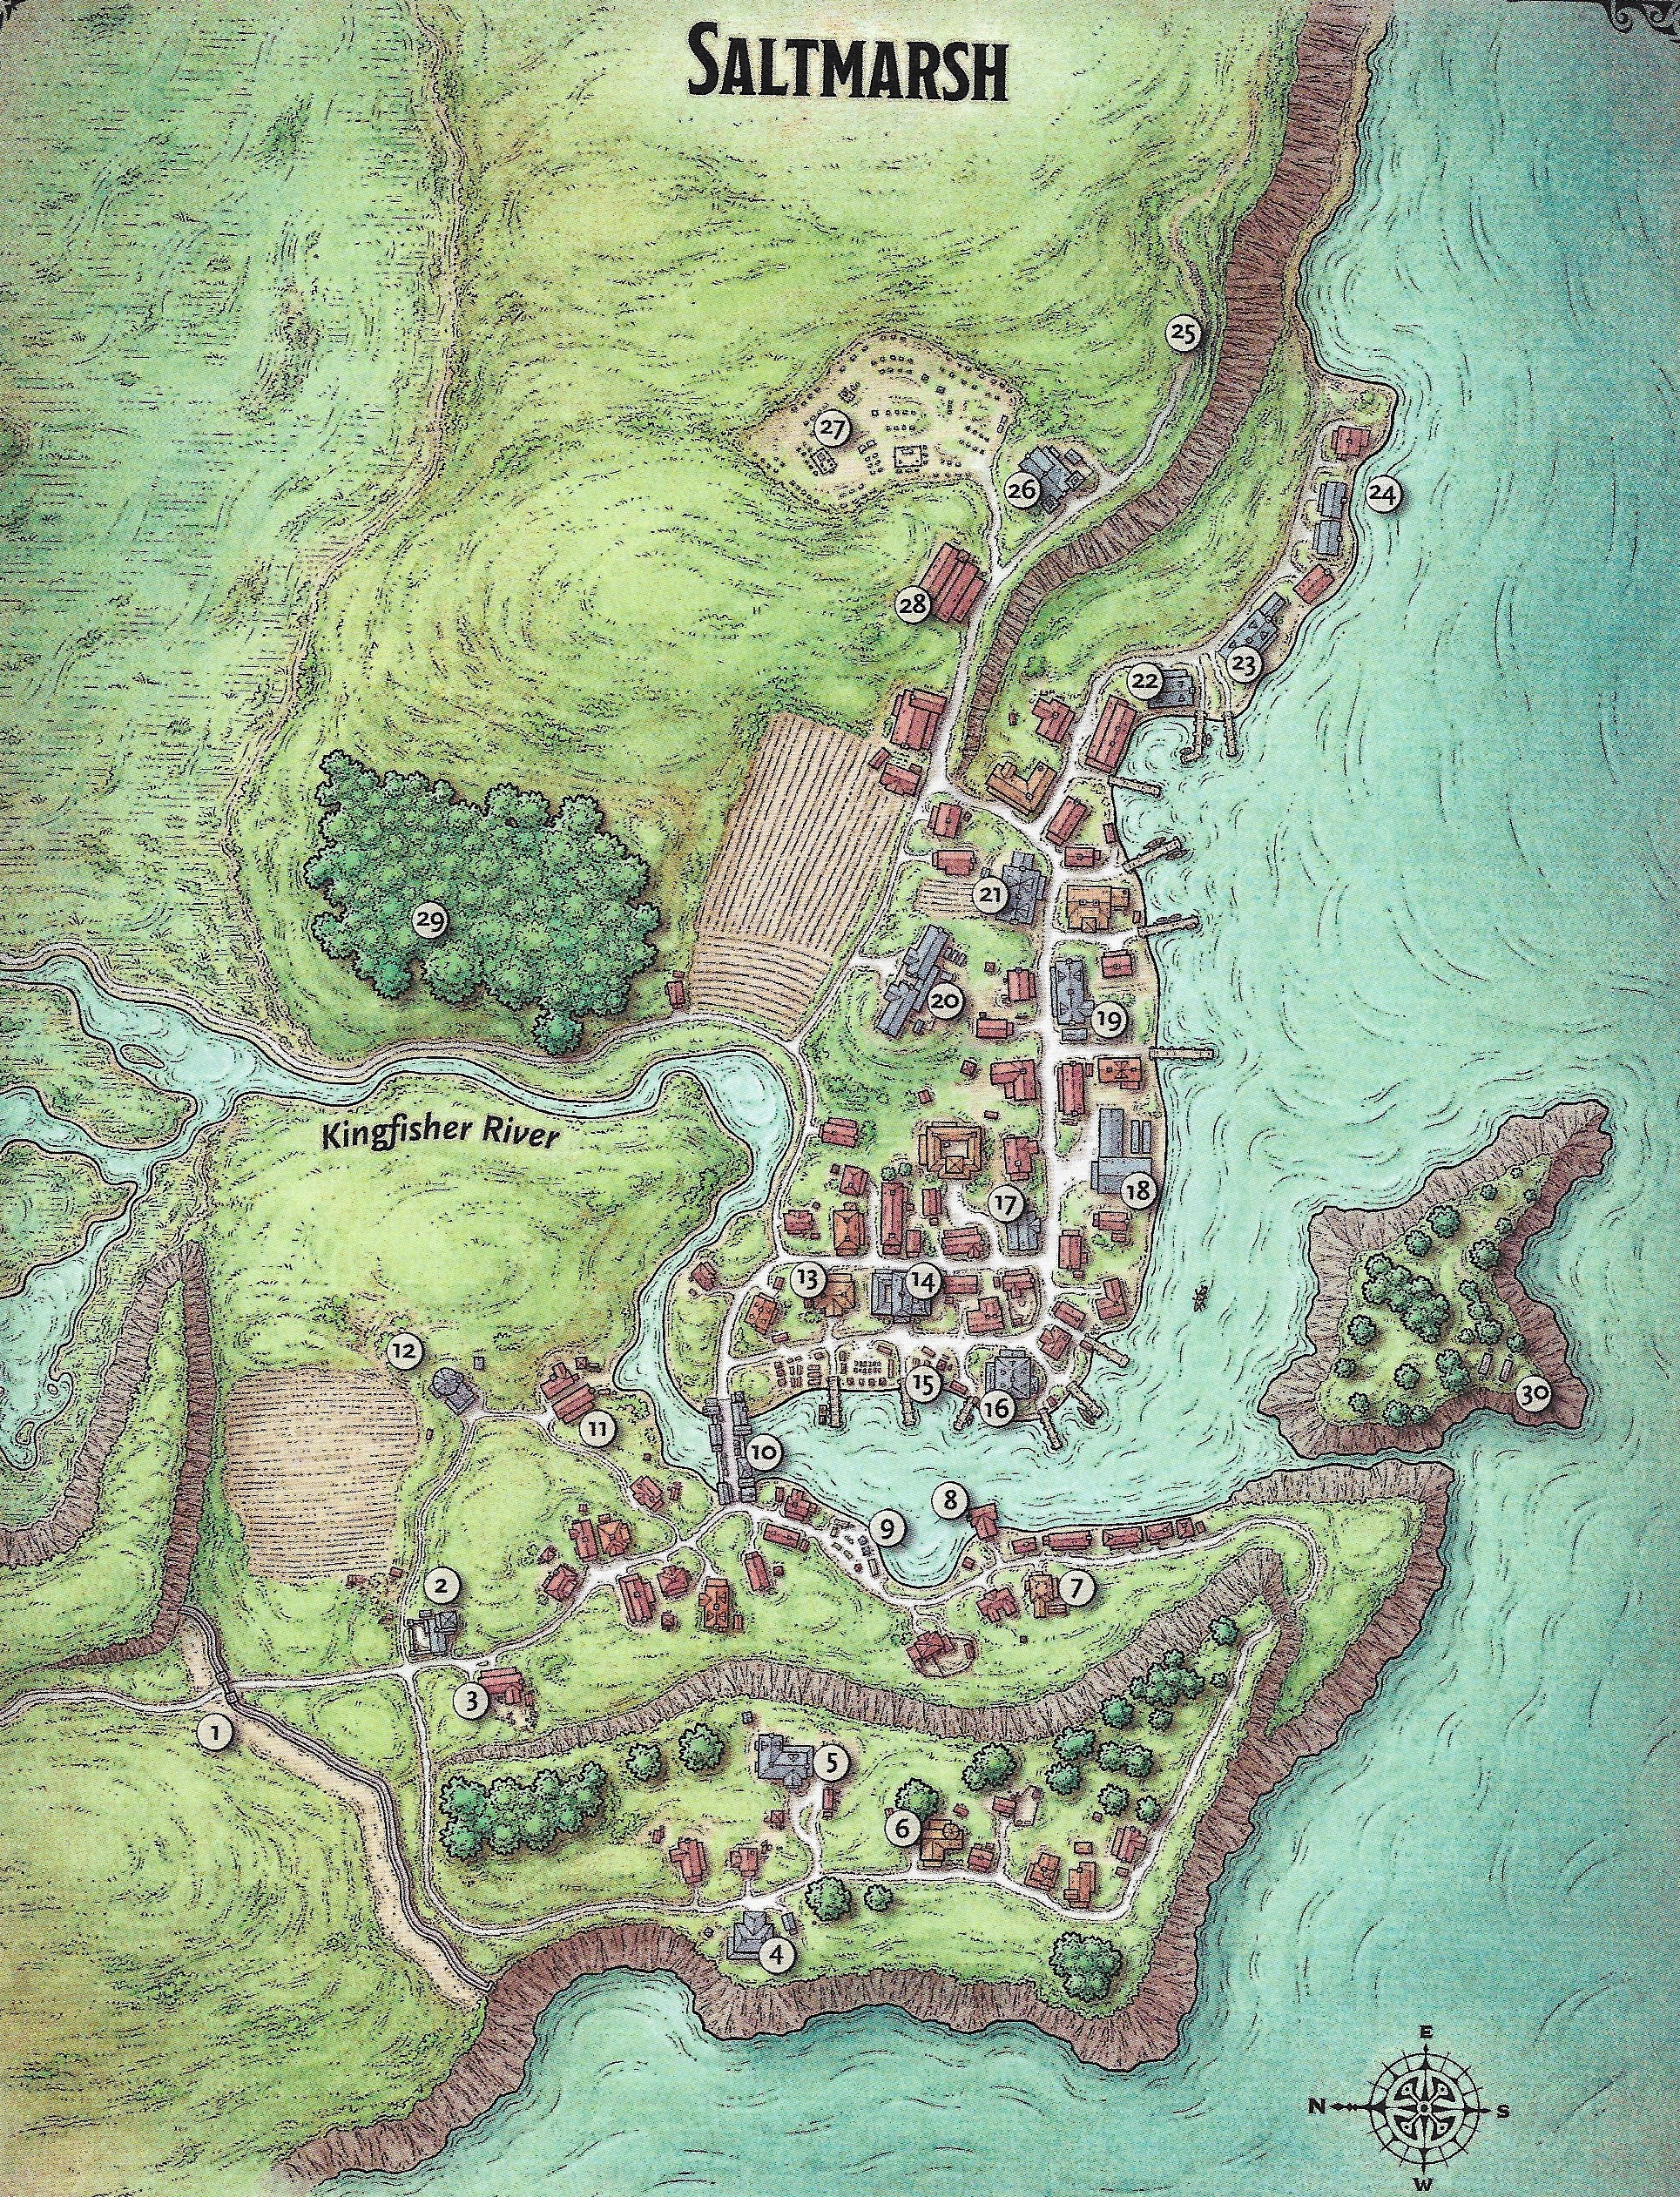 The Town of Saltmarsh cover